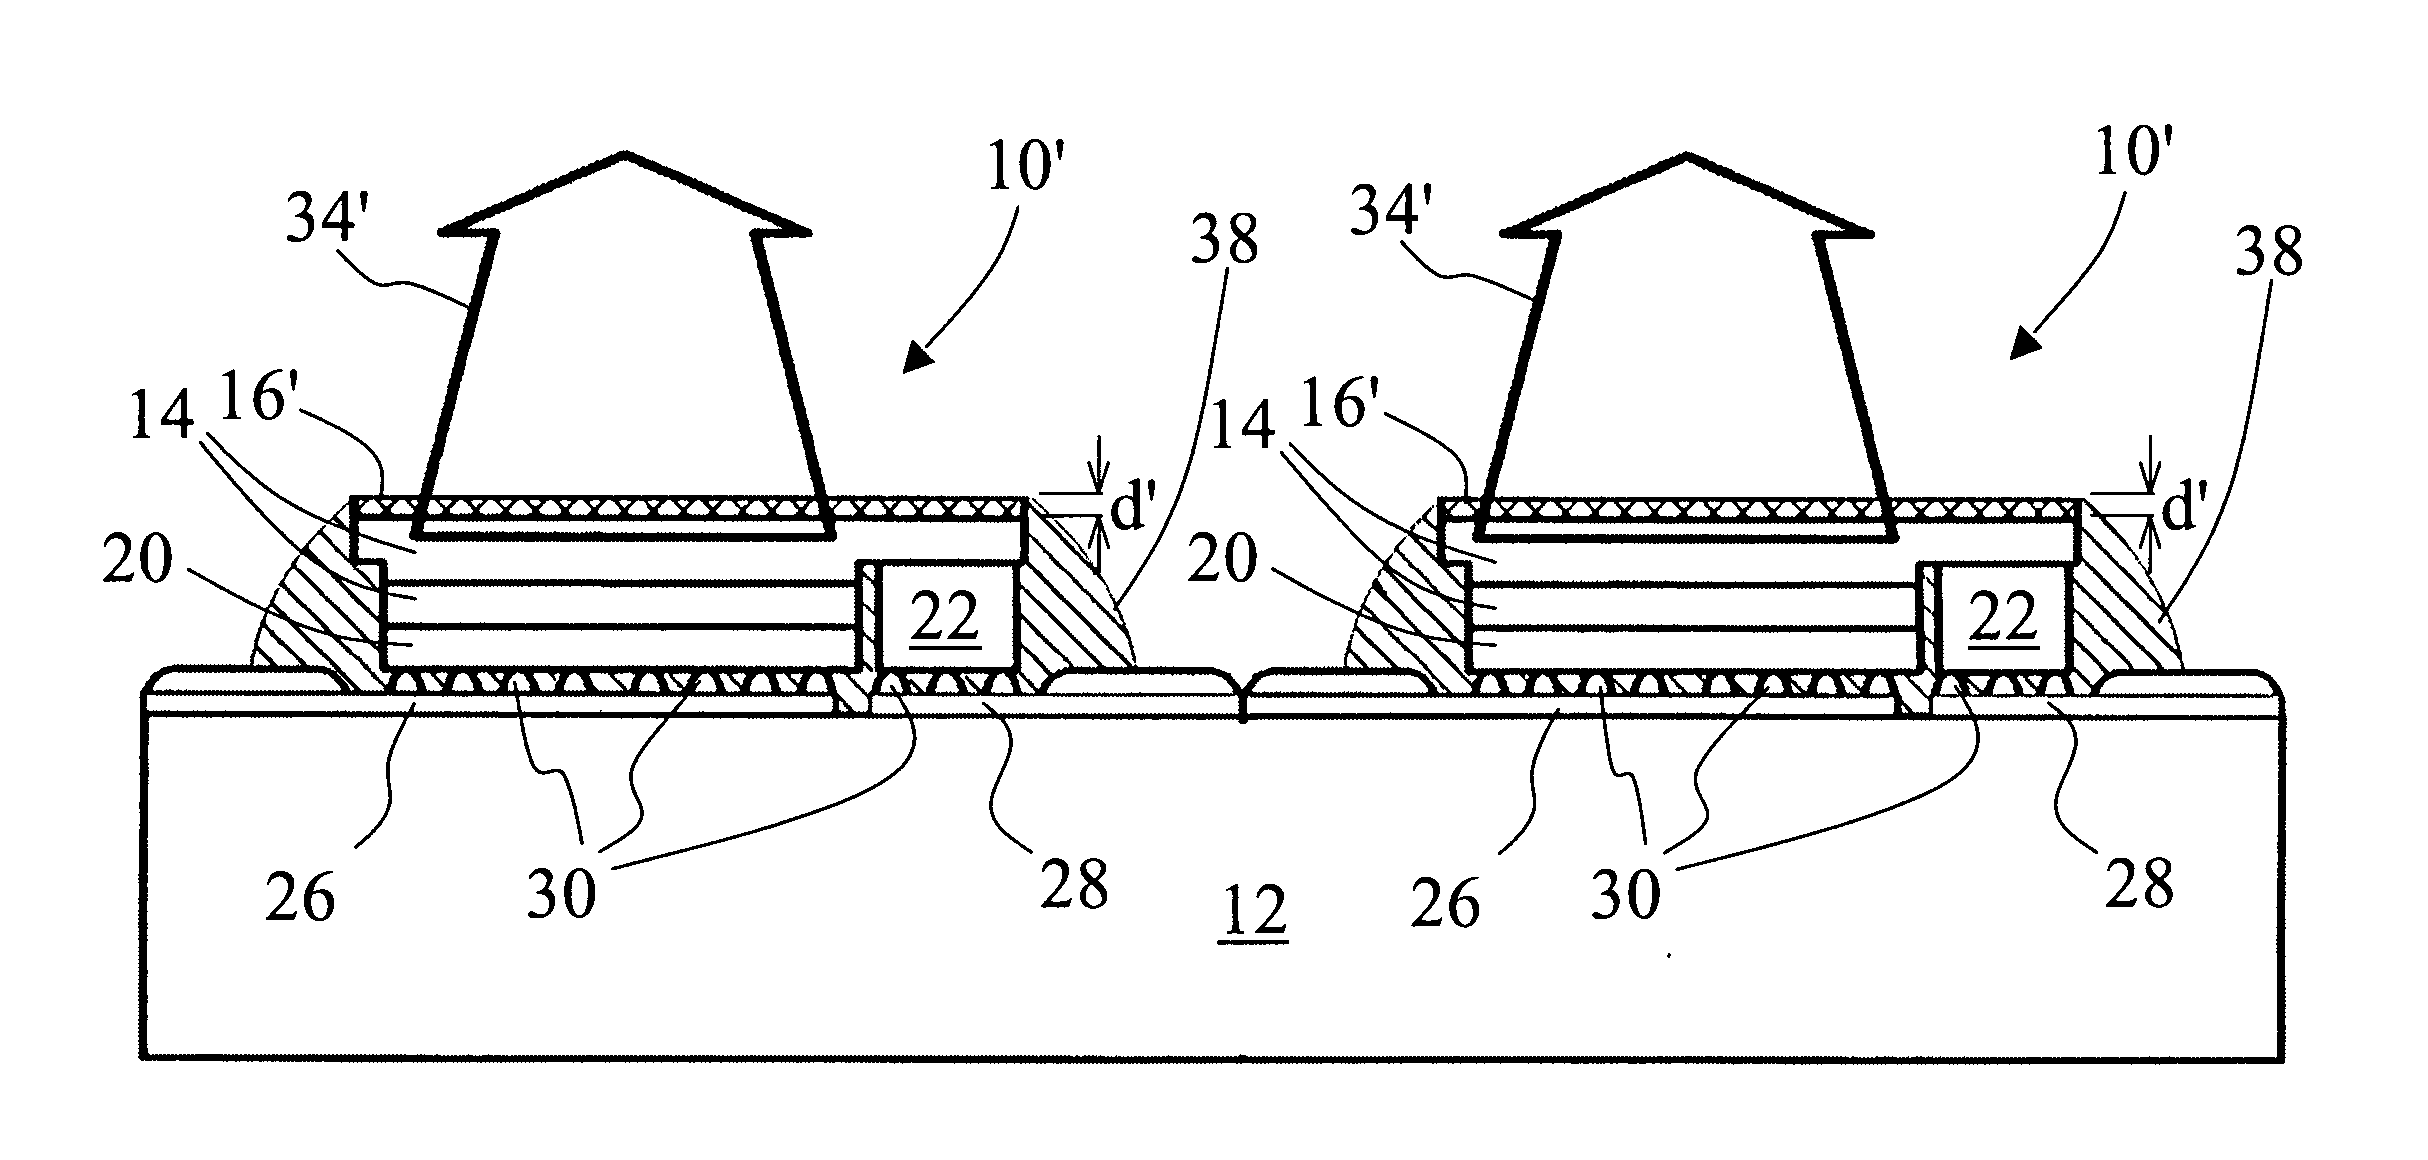 Flip chip light emitting diode devices having thinned or removed substrates